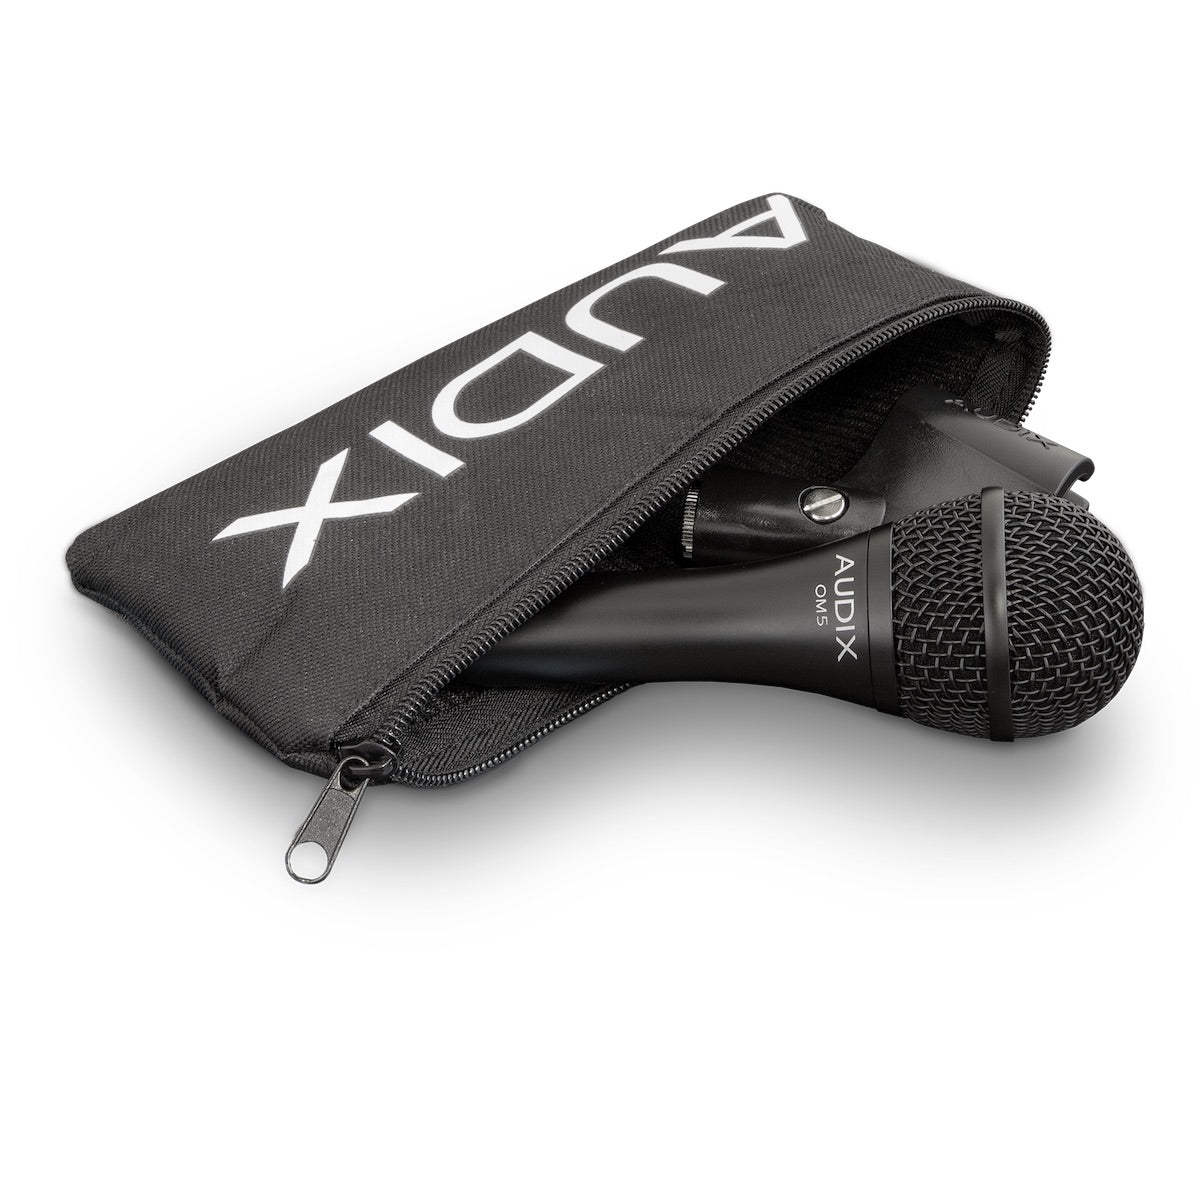 Audix OM5 Dynamic Hypercardioid Vocal Microphone with case